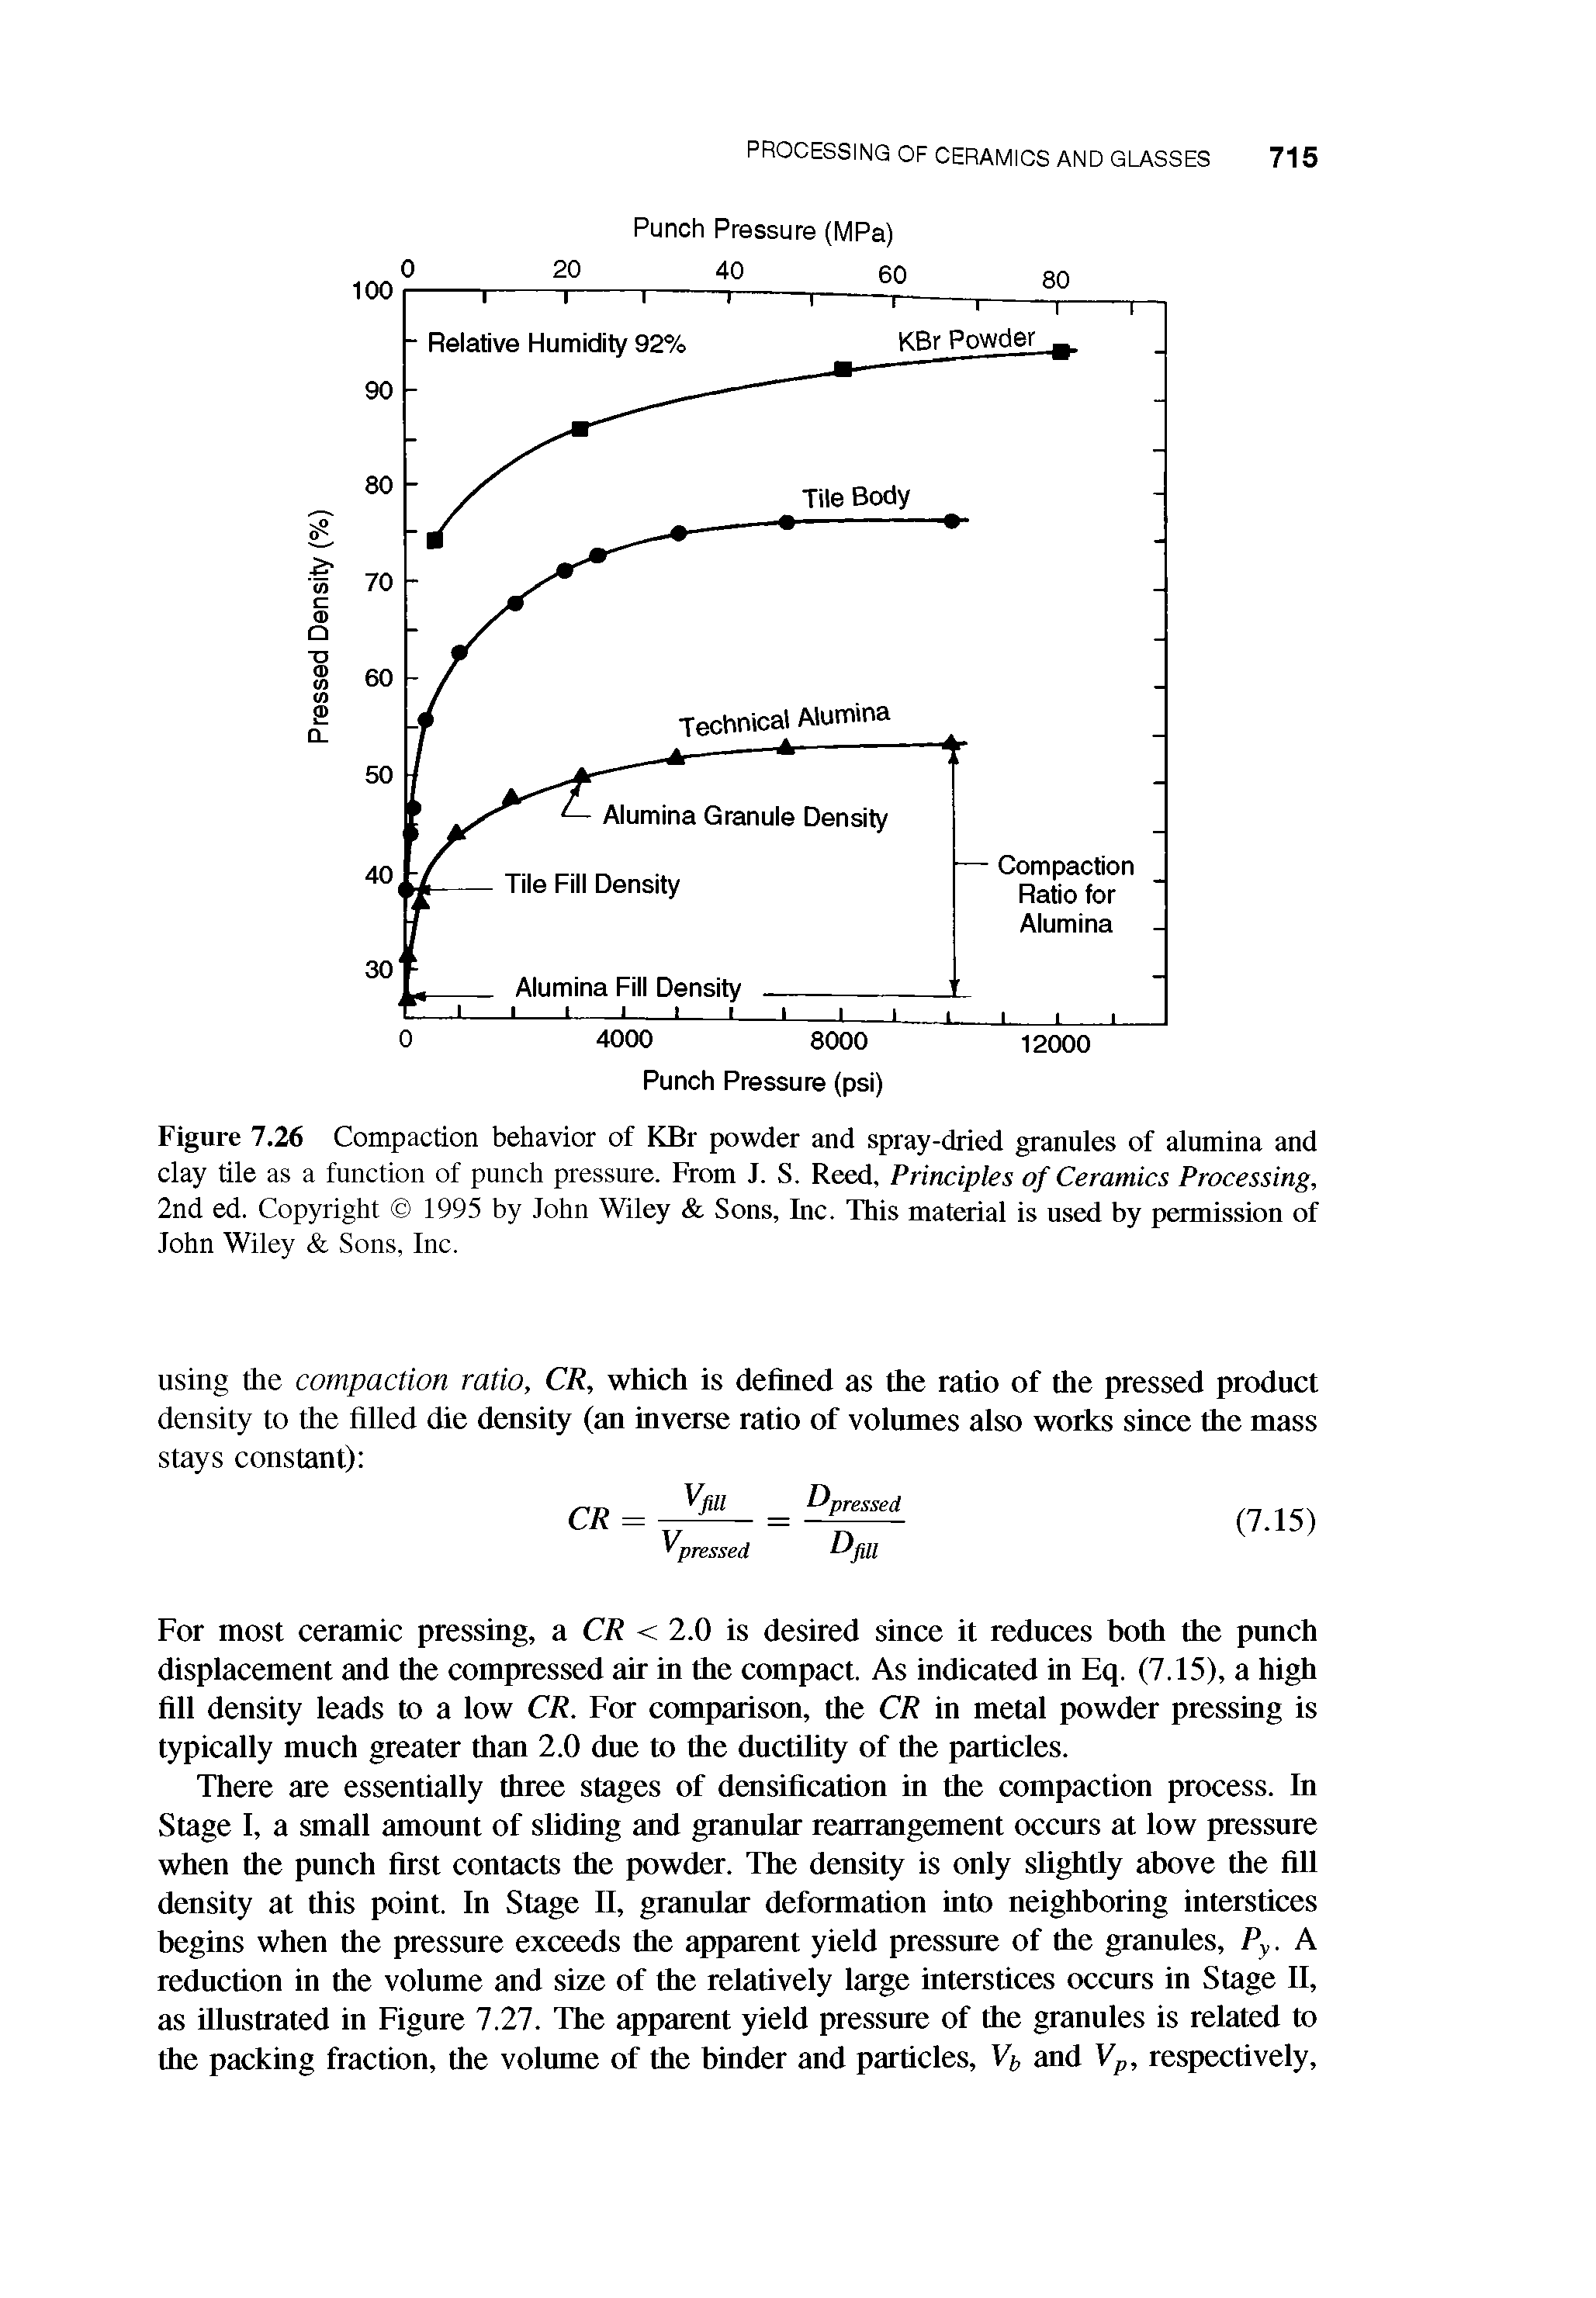 Figure 7.26 Compaction behavior of KBr powder and spray-dried granules of alumina and clay tile as a function of punch pressure. From J. S. Reed, Principles of Ceramics Processing, 2nd ed. Copyright 1995 by John Wiley Sons, Inc. This material is used by permission of John Wiley Sons, Inc.